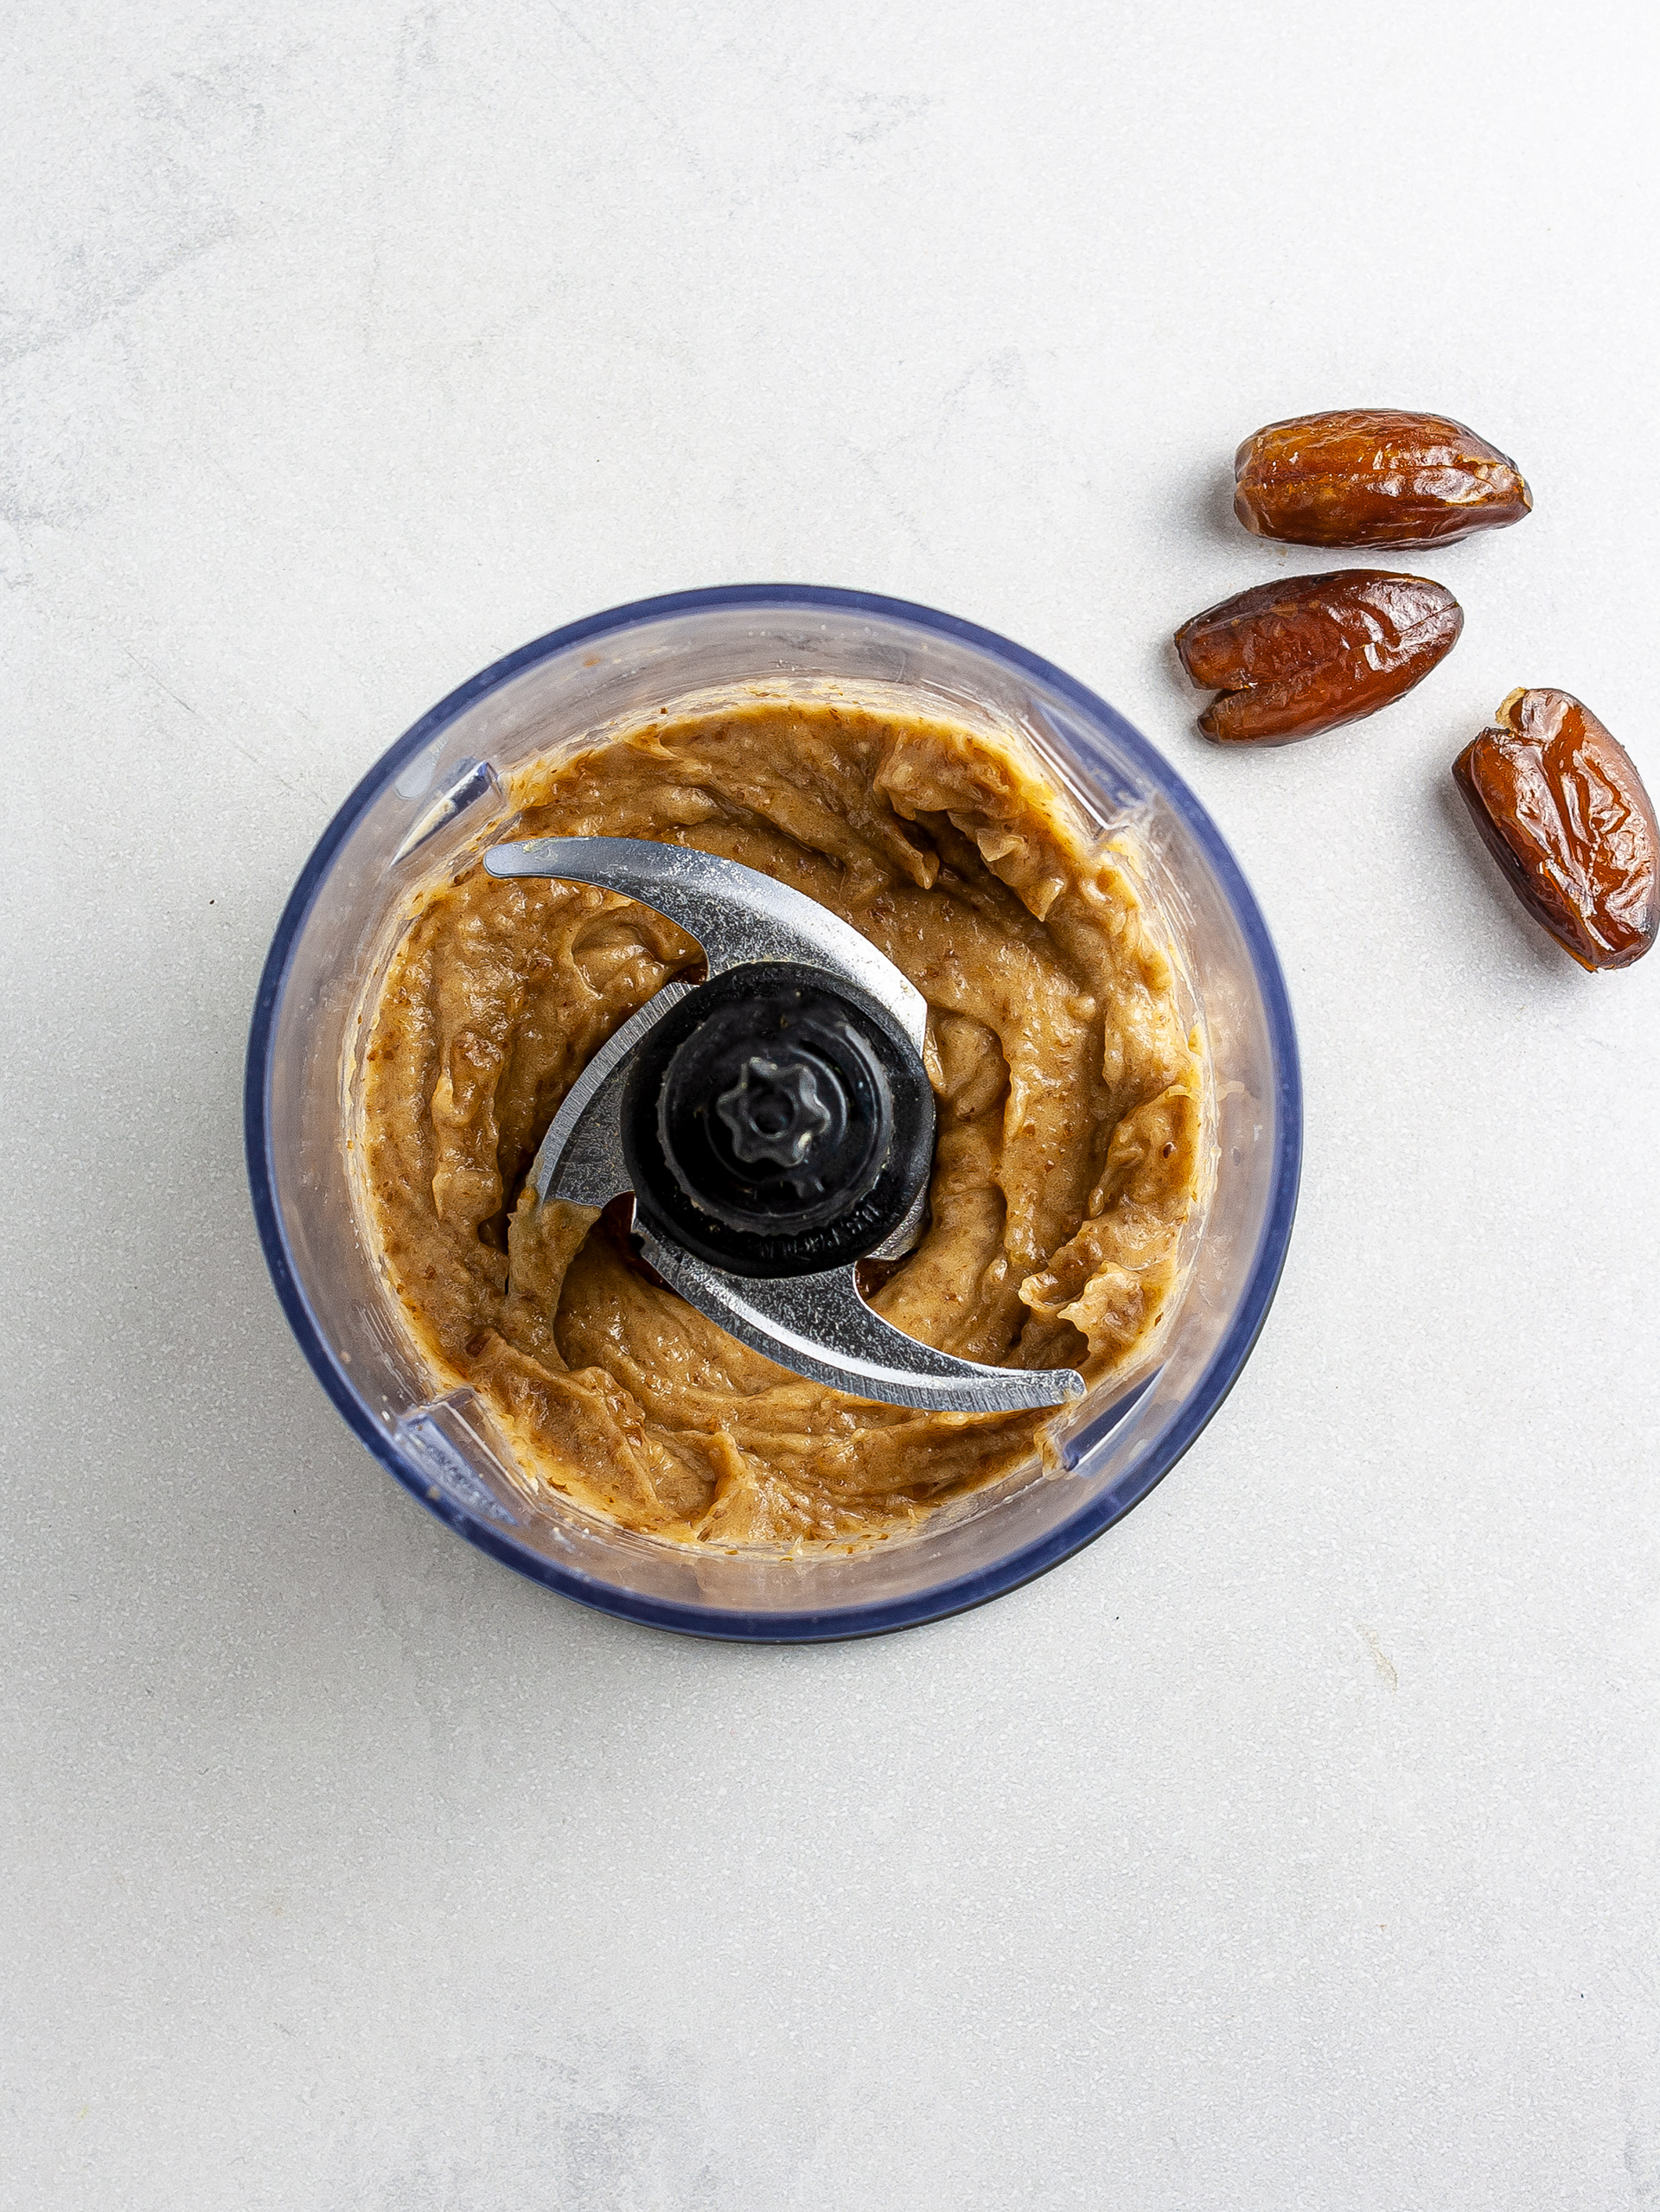 Dates blended into a paste